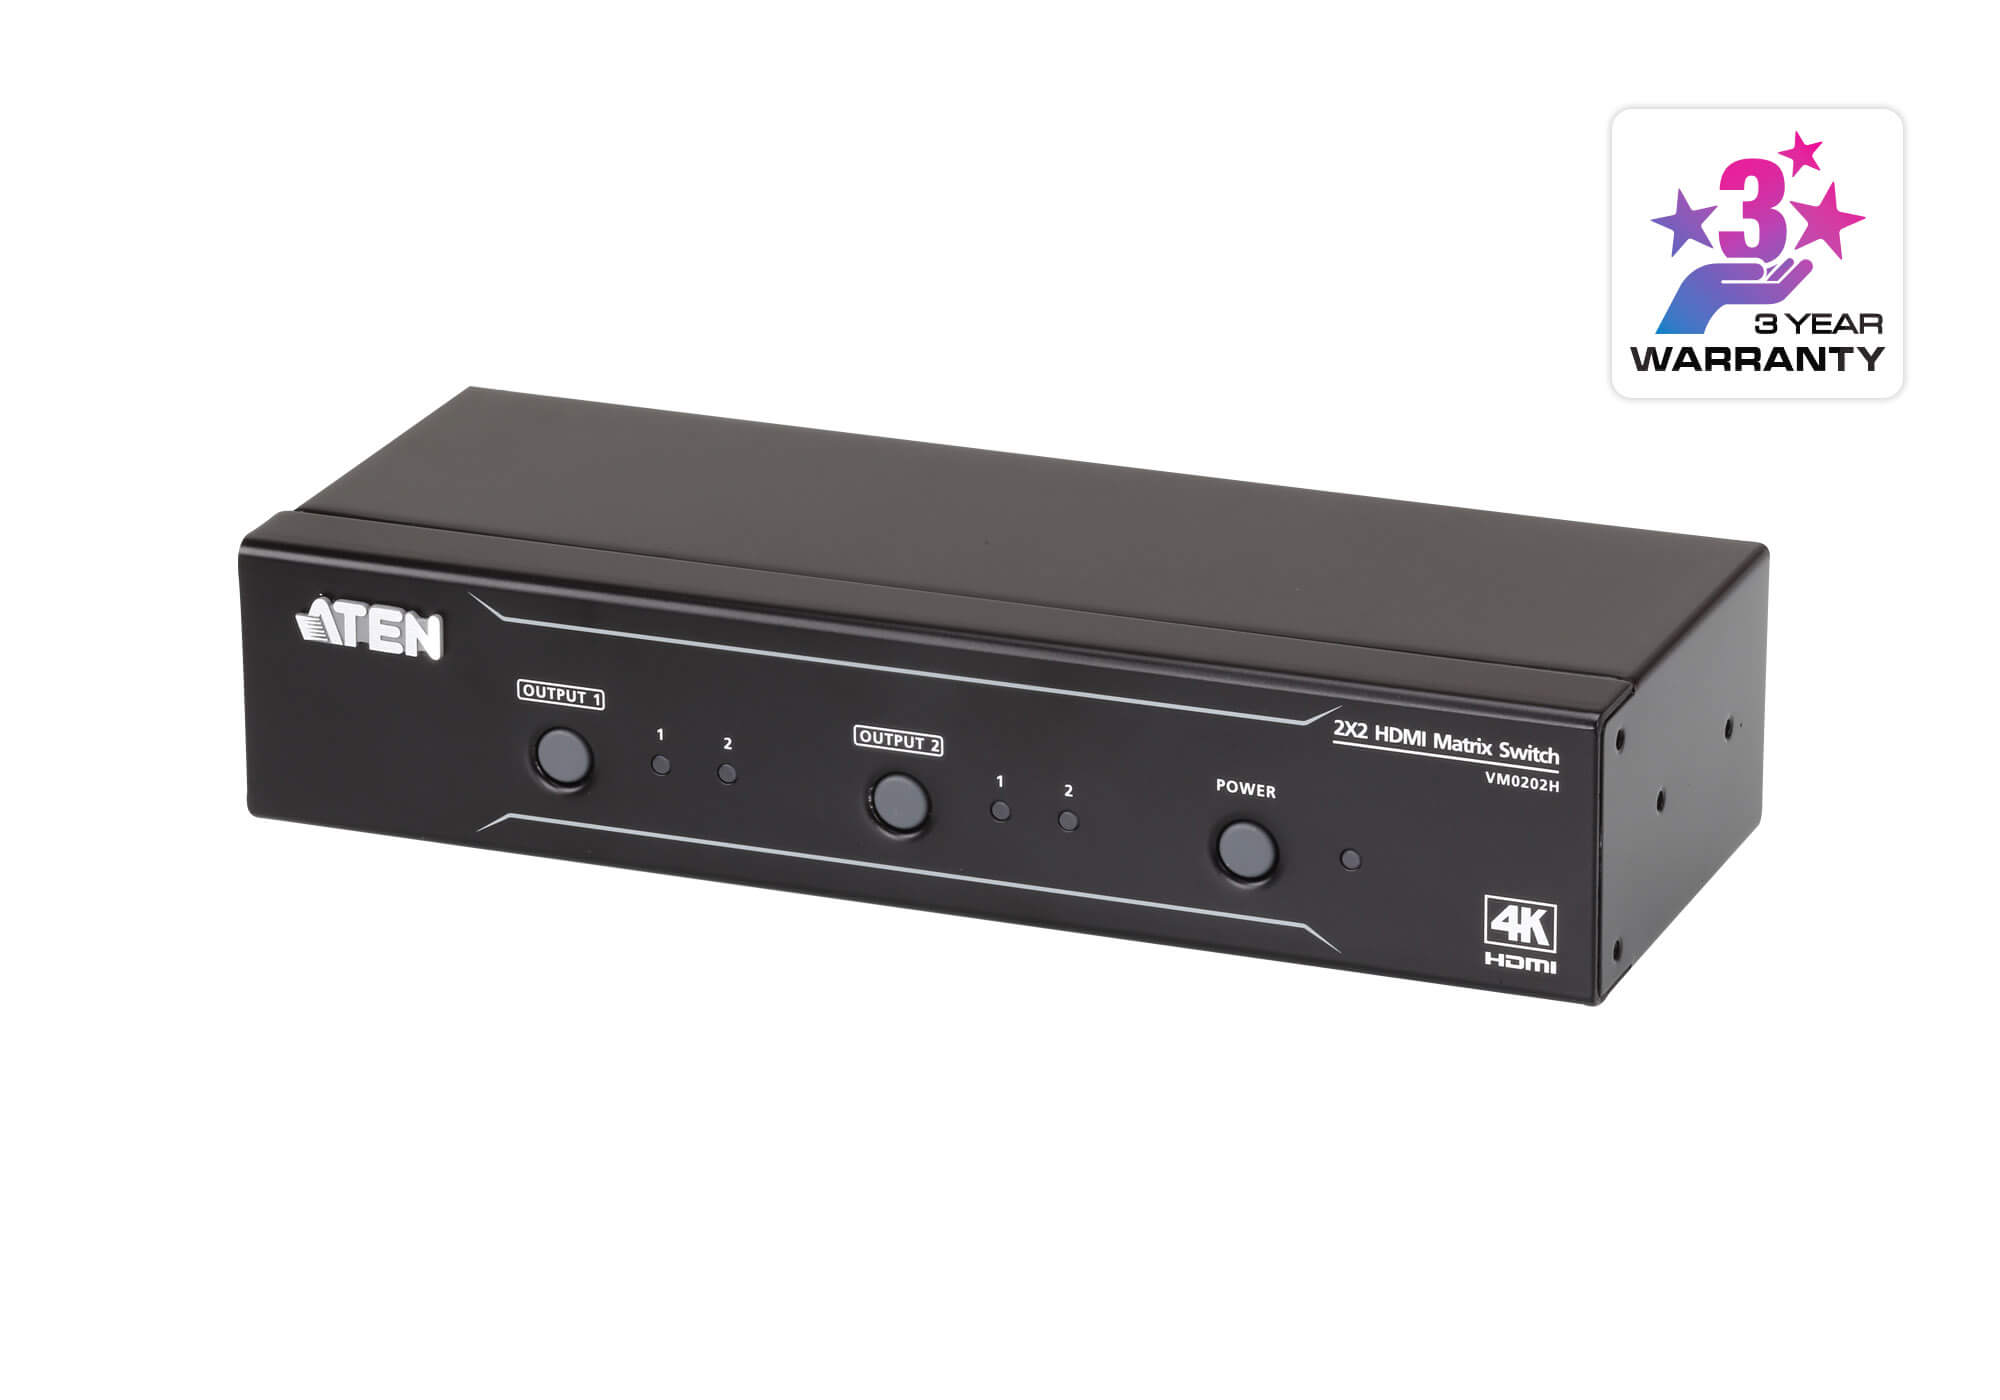 Aten 2x2 4K HDMI Matrix, control via front-panel pushbuttons, IR remote and RS232 control, EDID management